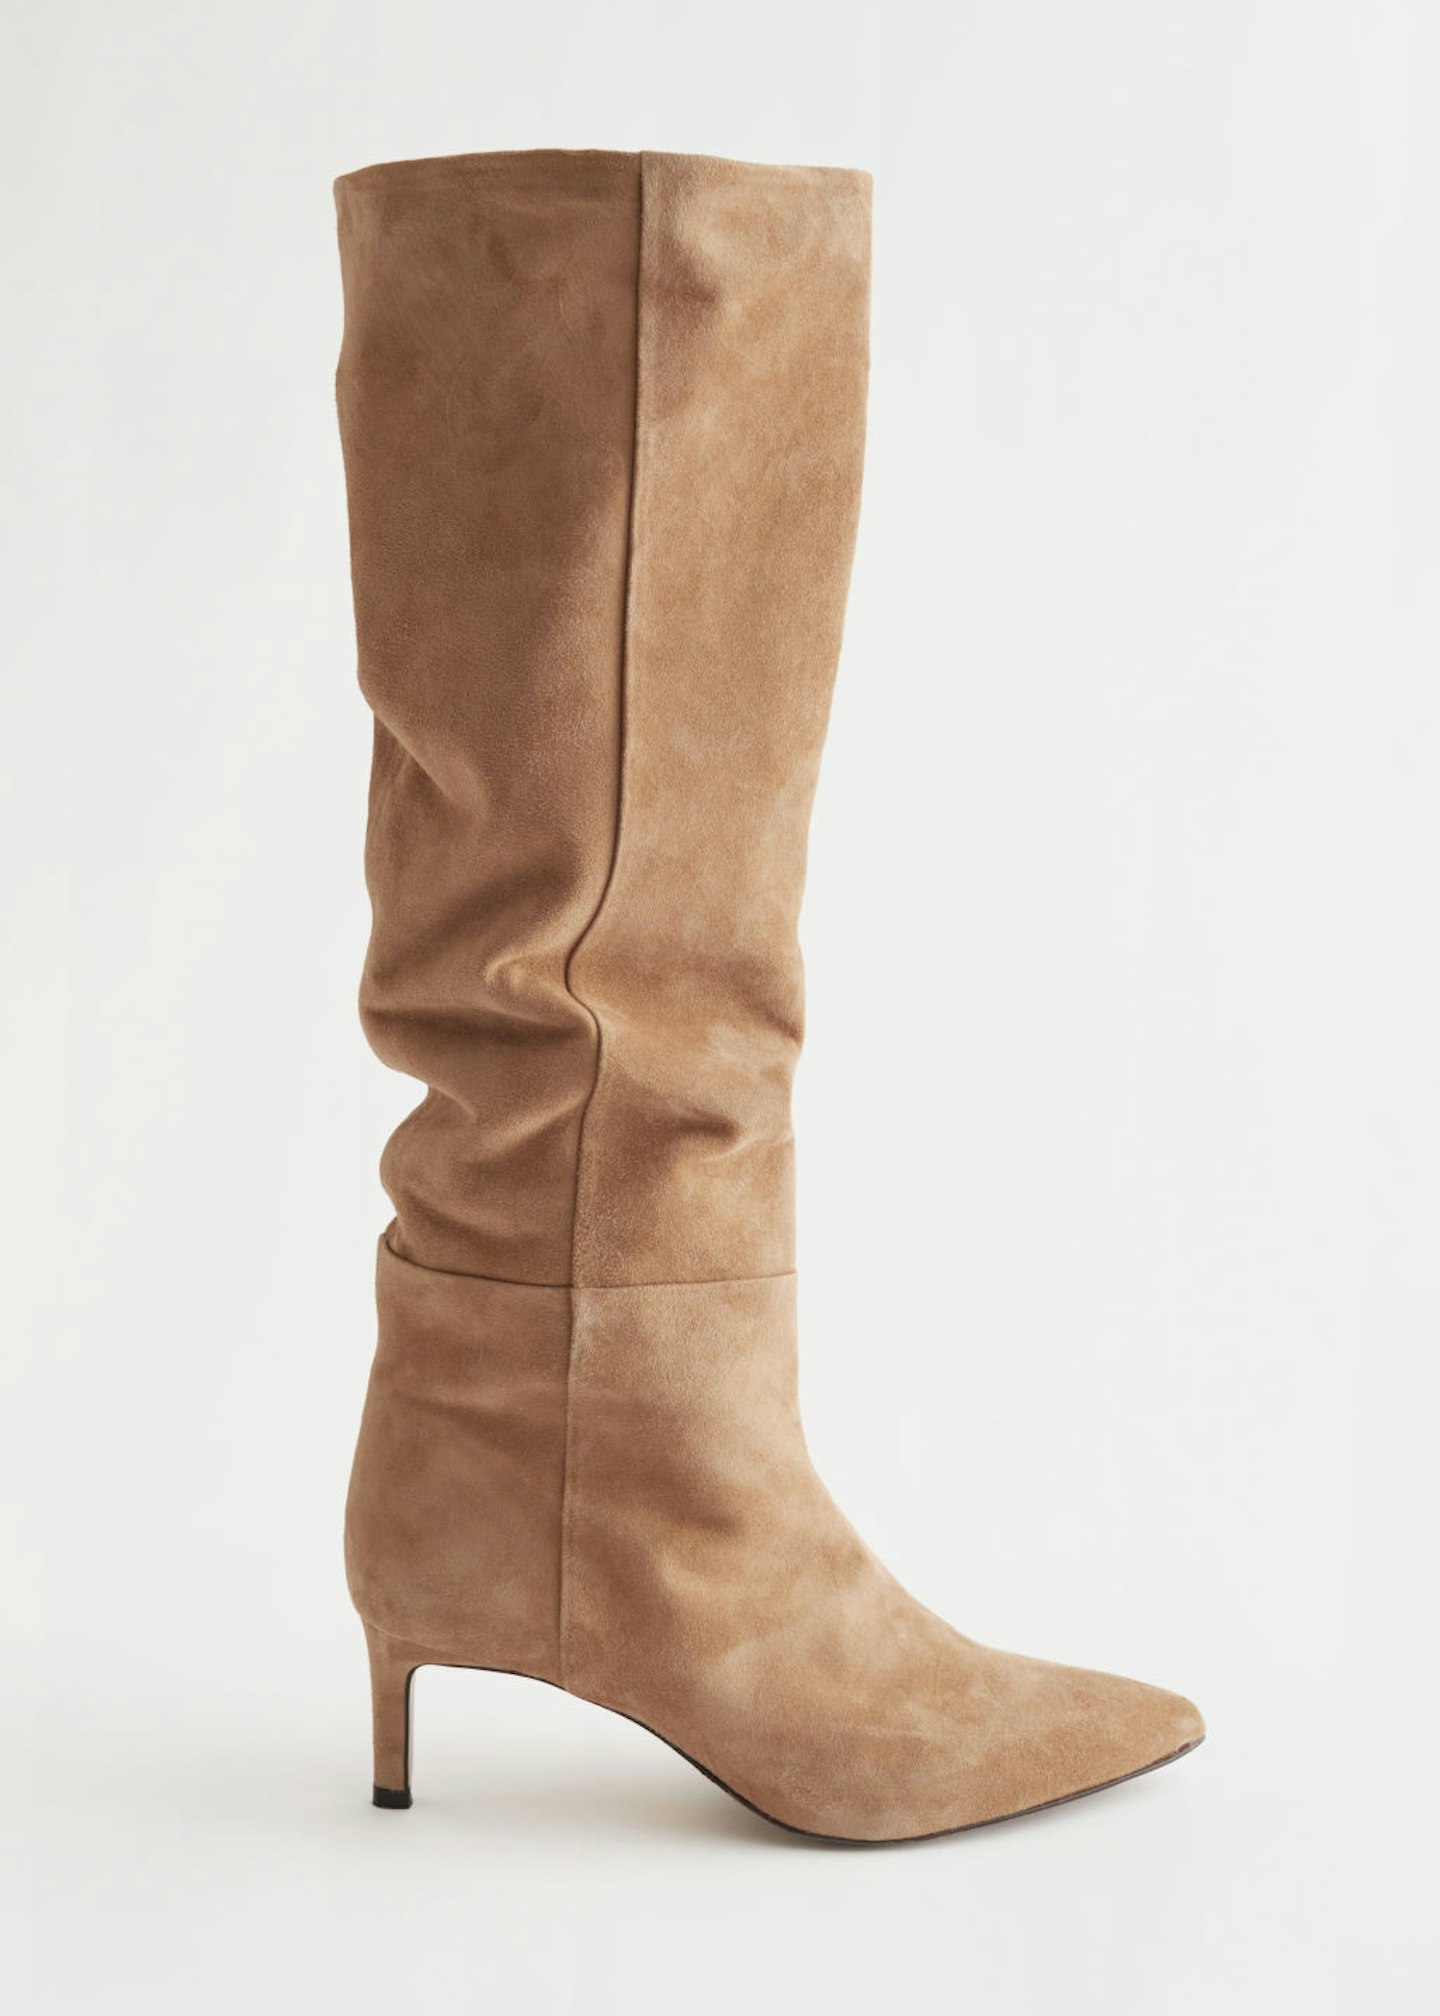 & Other Stories, Knee-High Leather Boots, £205